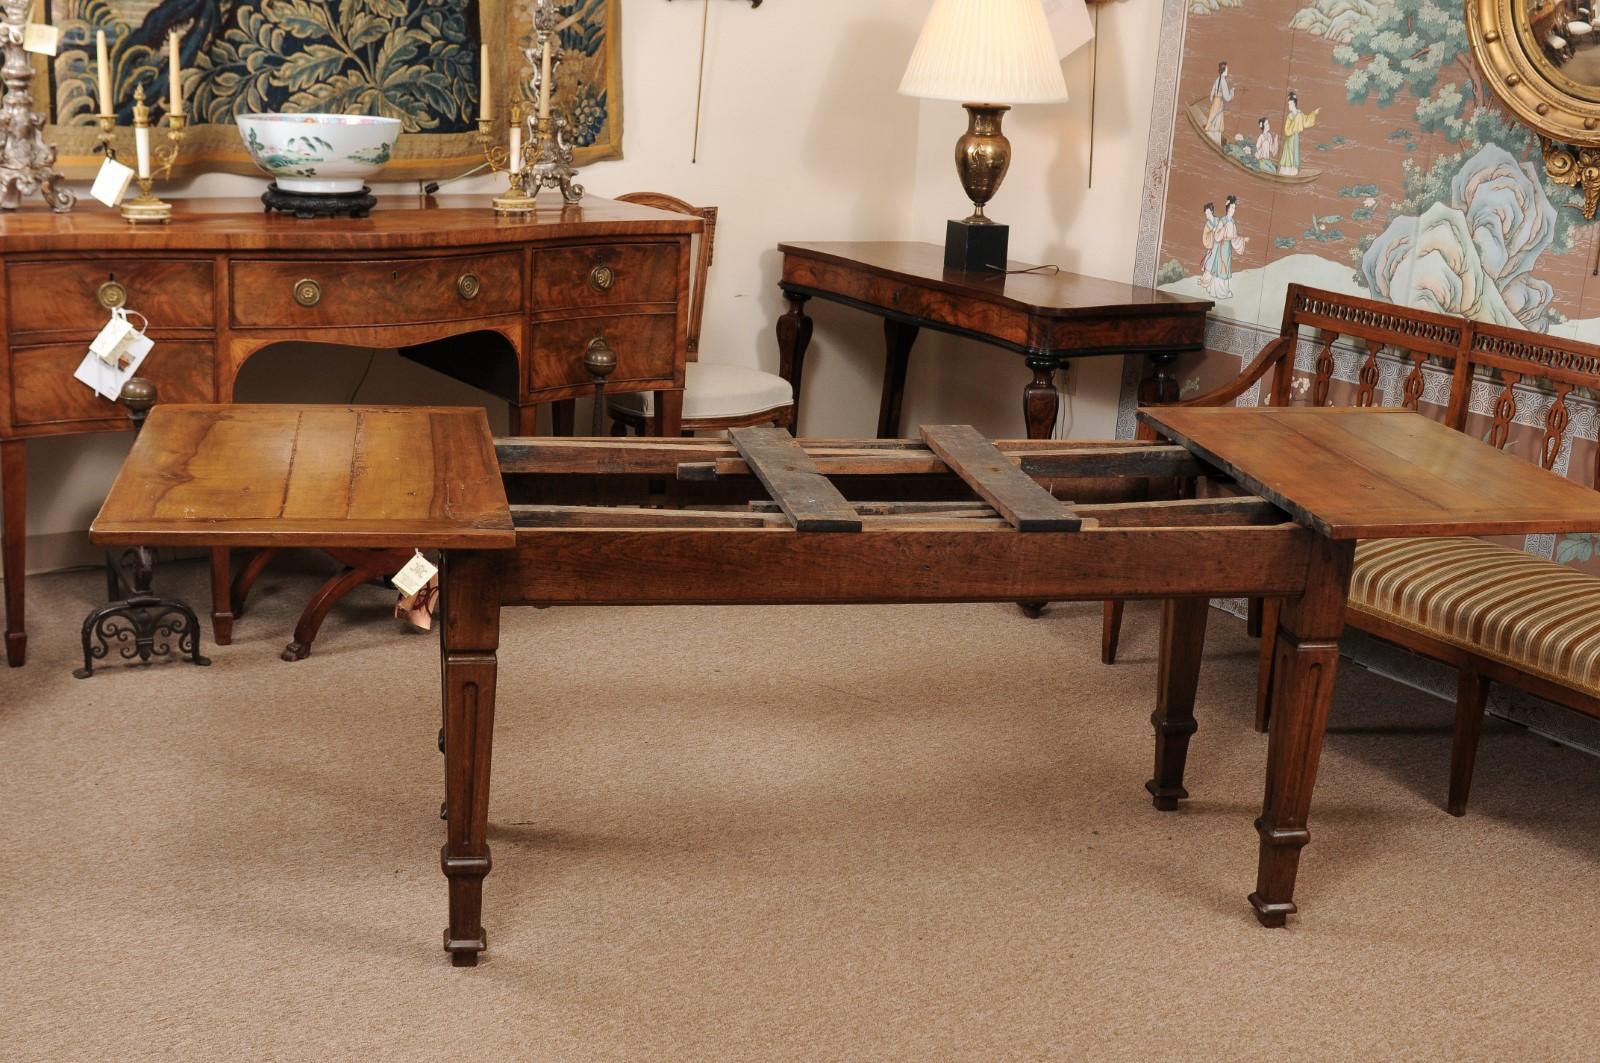 The walnut Italian refractory table with fruitwood top and 2 pullout / pull-out extension leaves. The legs made out of oak with tapered and carved fluting detail. 

The total length with leaves extended out is 115